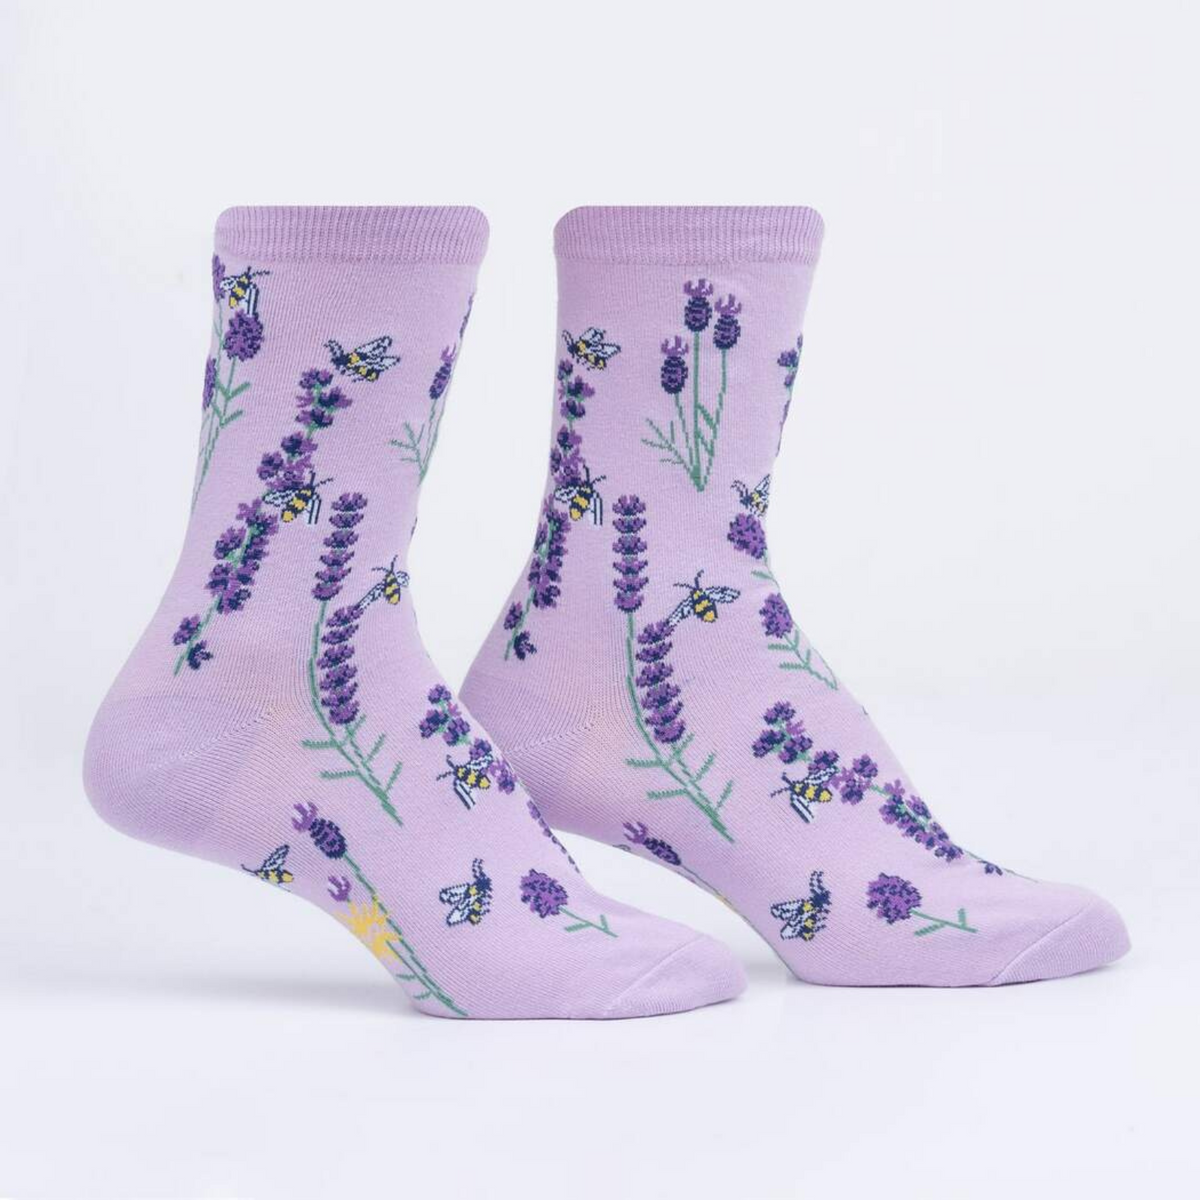 Sock It To Me Bees and Lavender women&#39;s socks featuring lavender socks with bees and lavender flowers all over on display feet